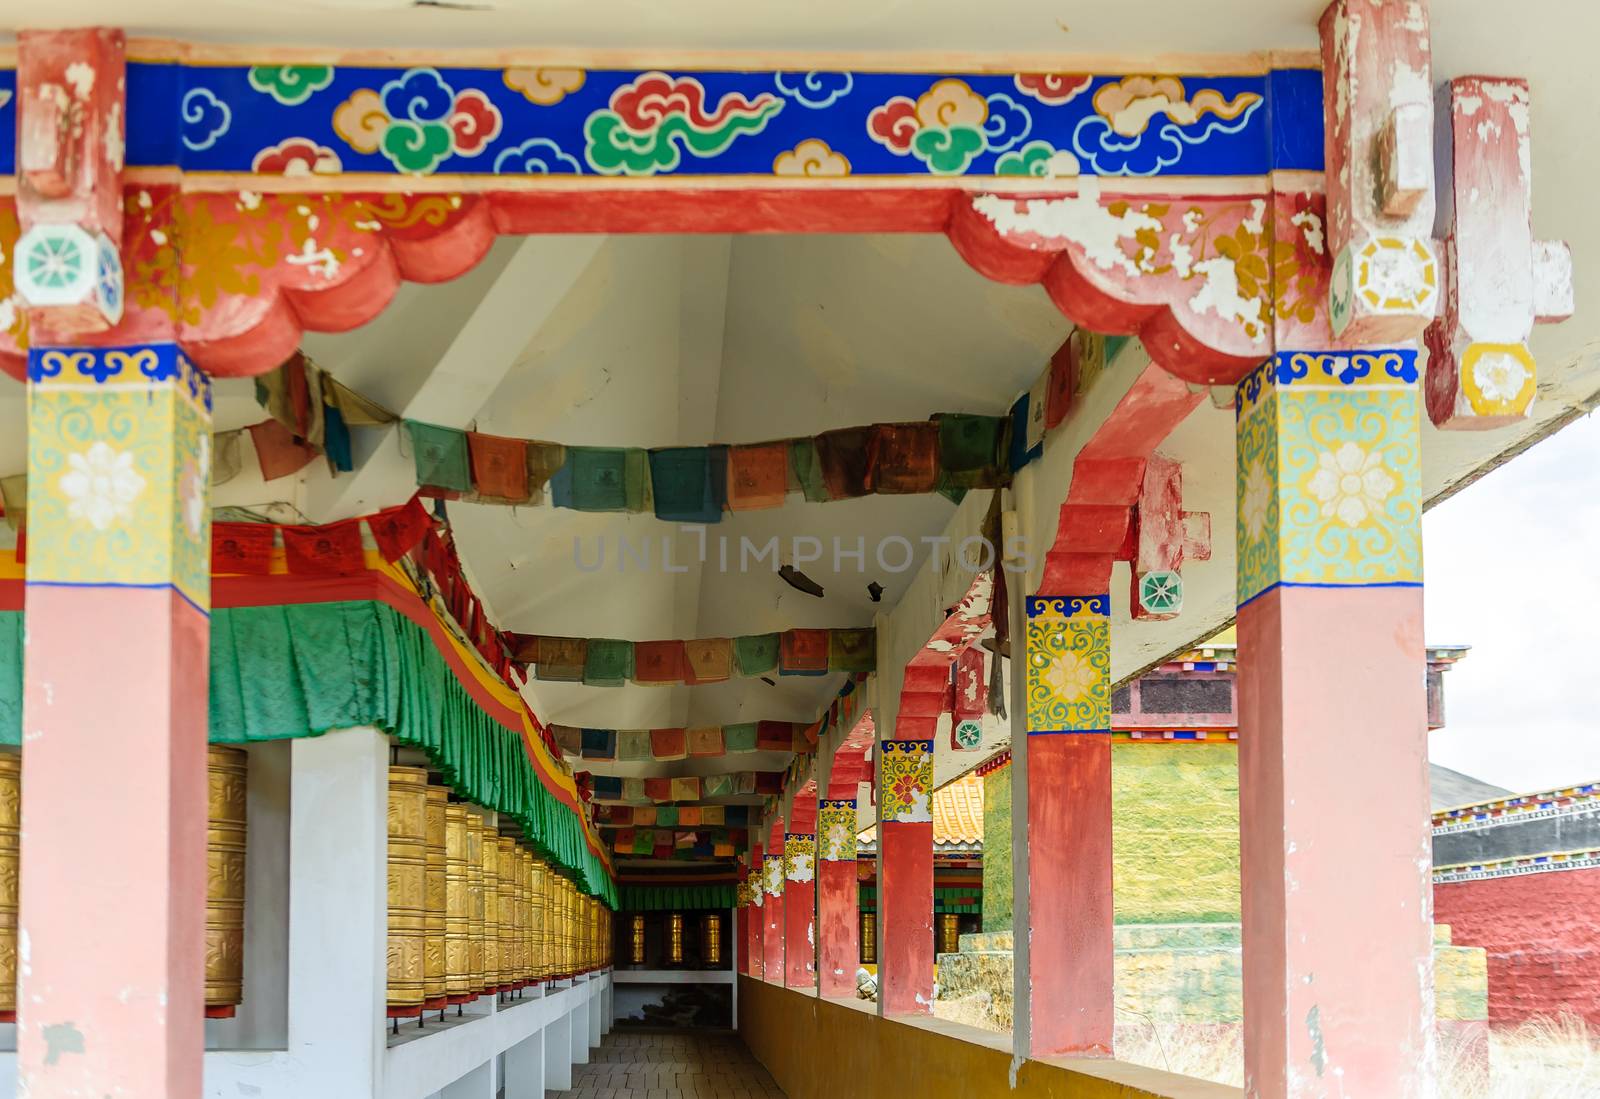 The prayer wheels inside Lharong Monastery in Sertar, Tibet.  Lharong Monastery is a Tibetan Buddhist Institute at an elevation of about 4000 meters.